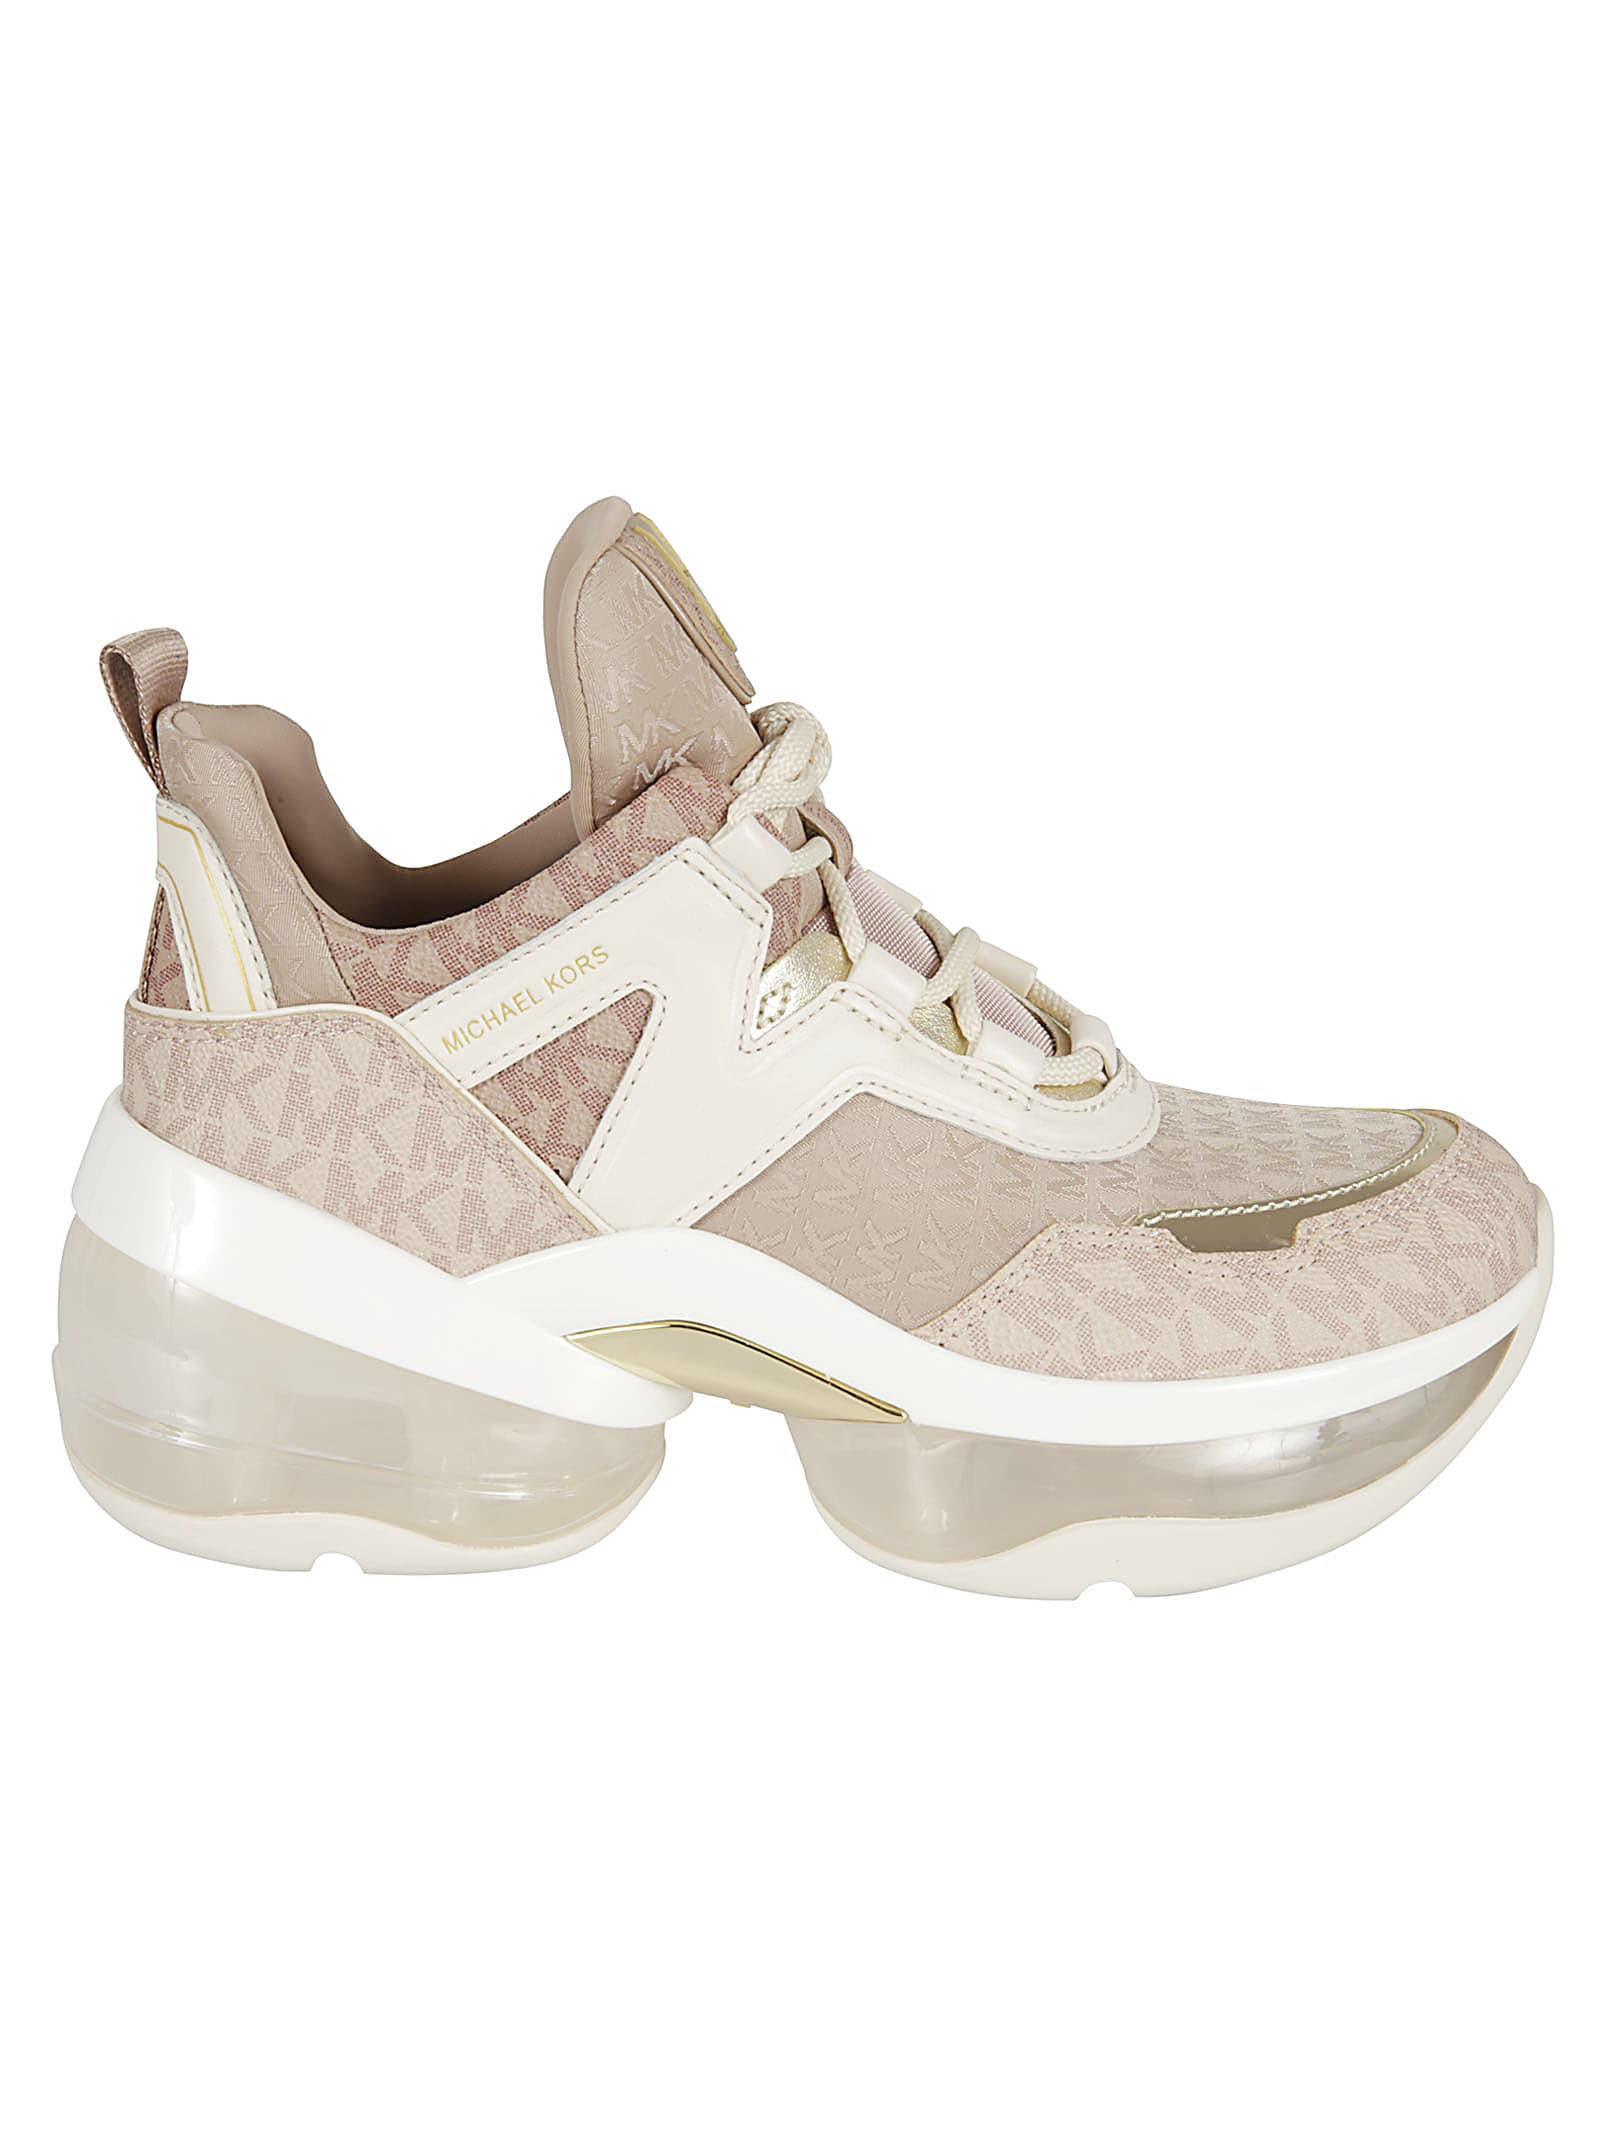 Michael Kors Olympia Extreme Sneakers